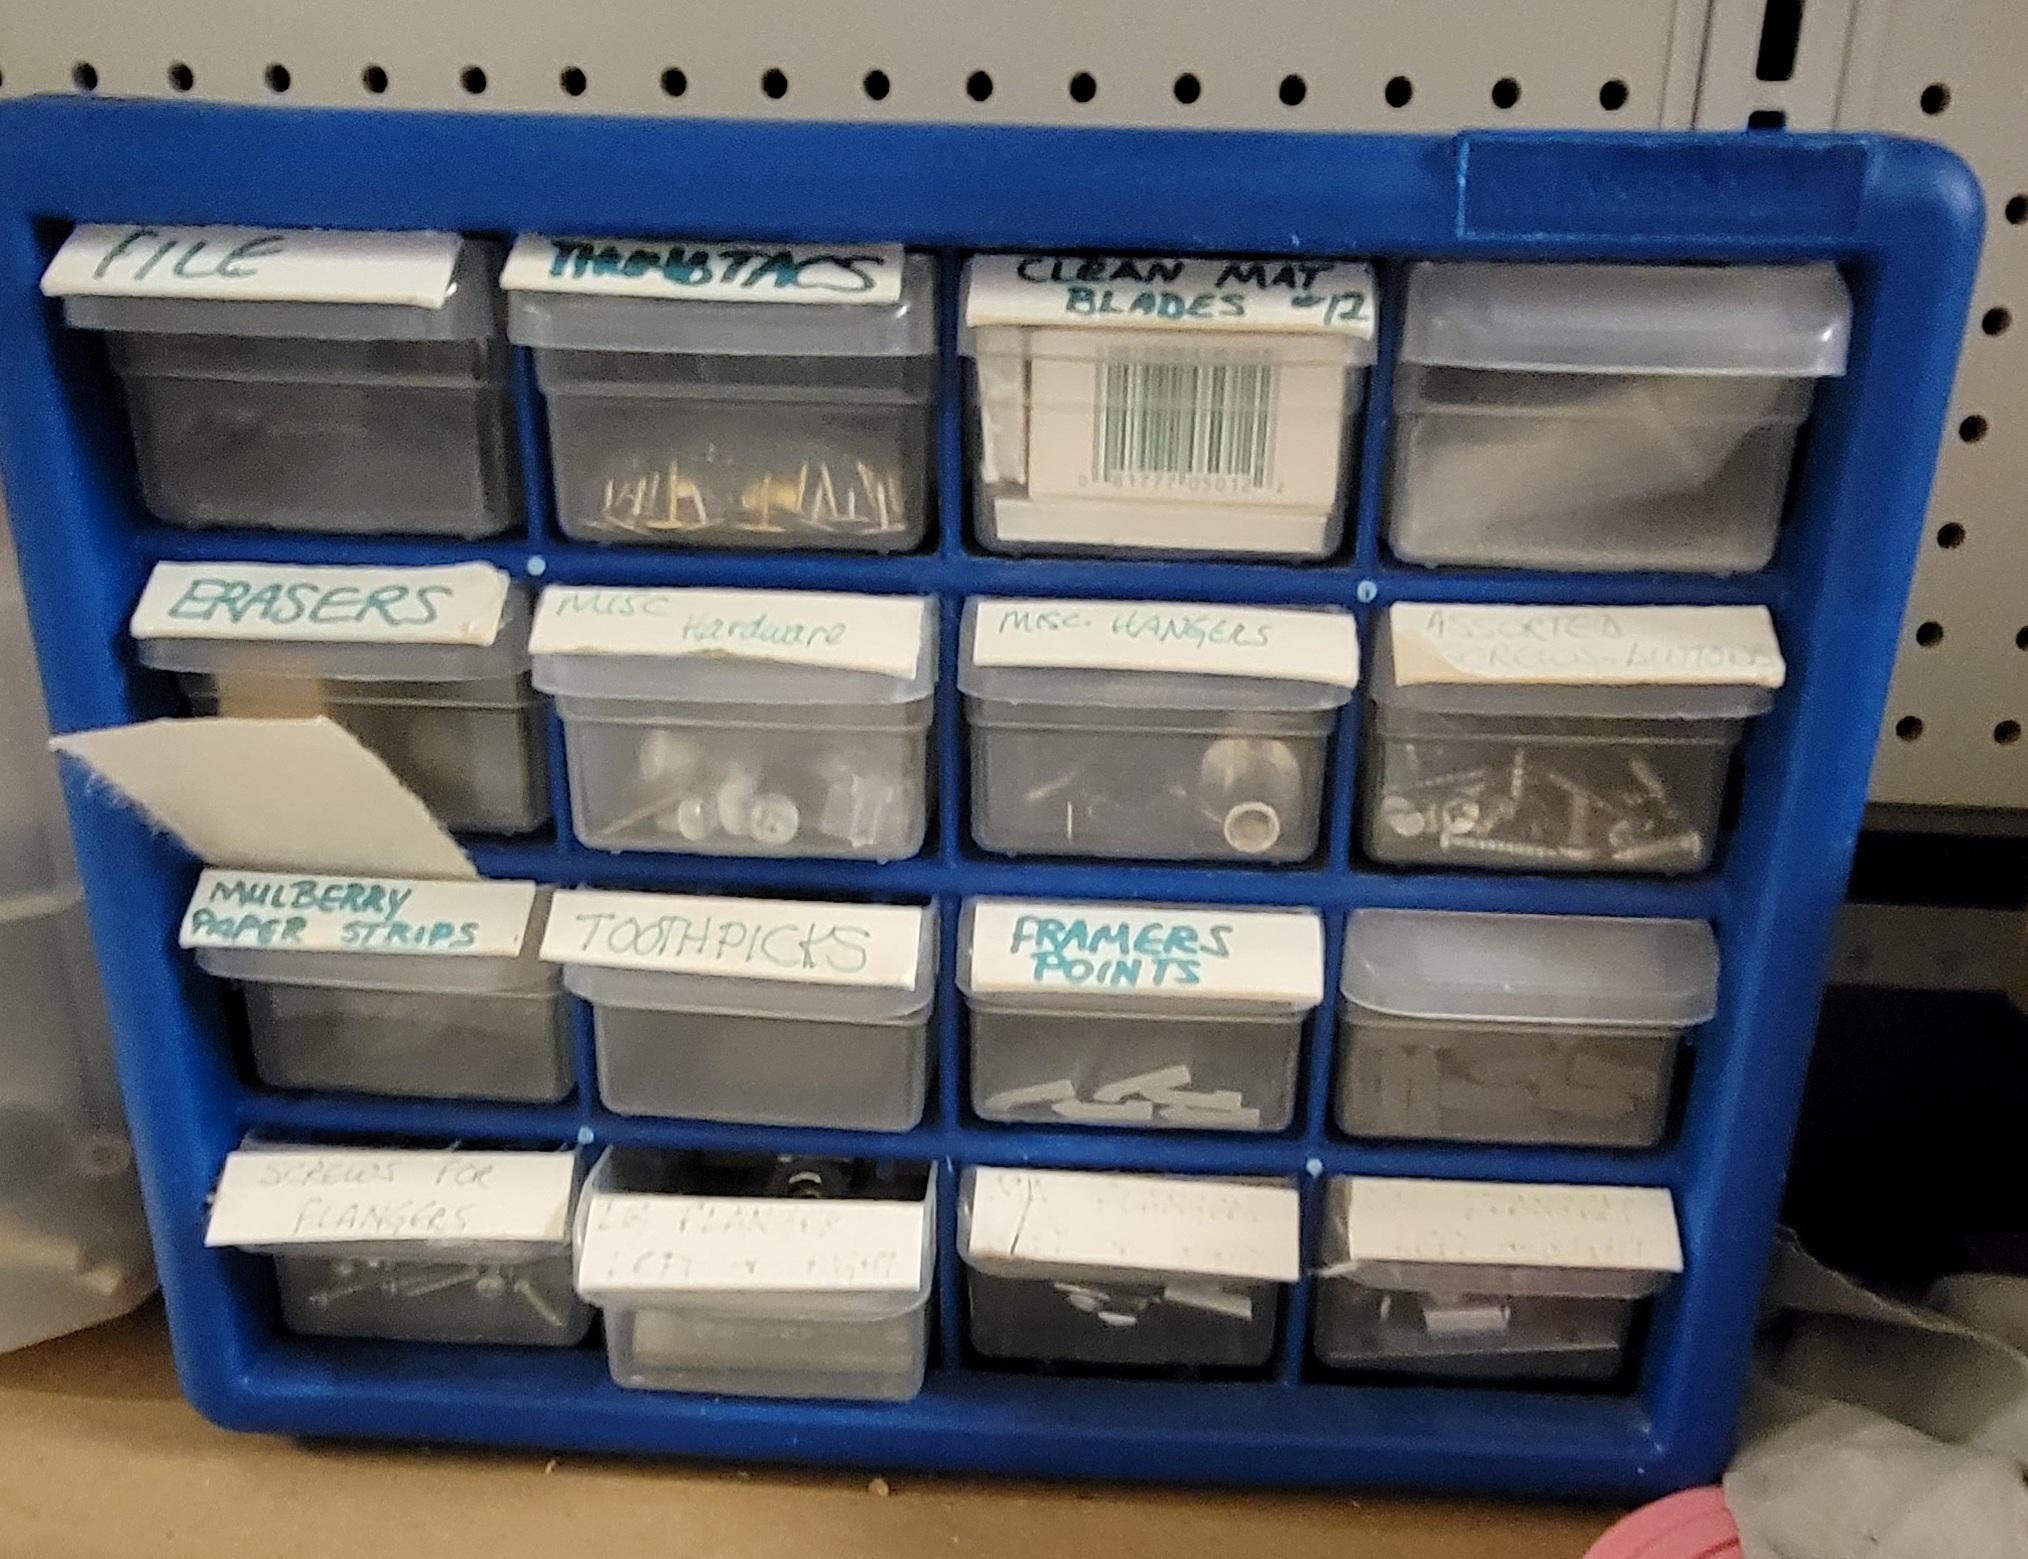 2 organizers with misc. points, nails, screws, etc…